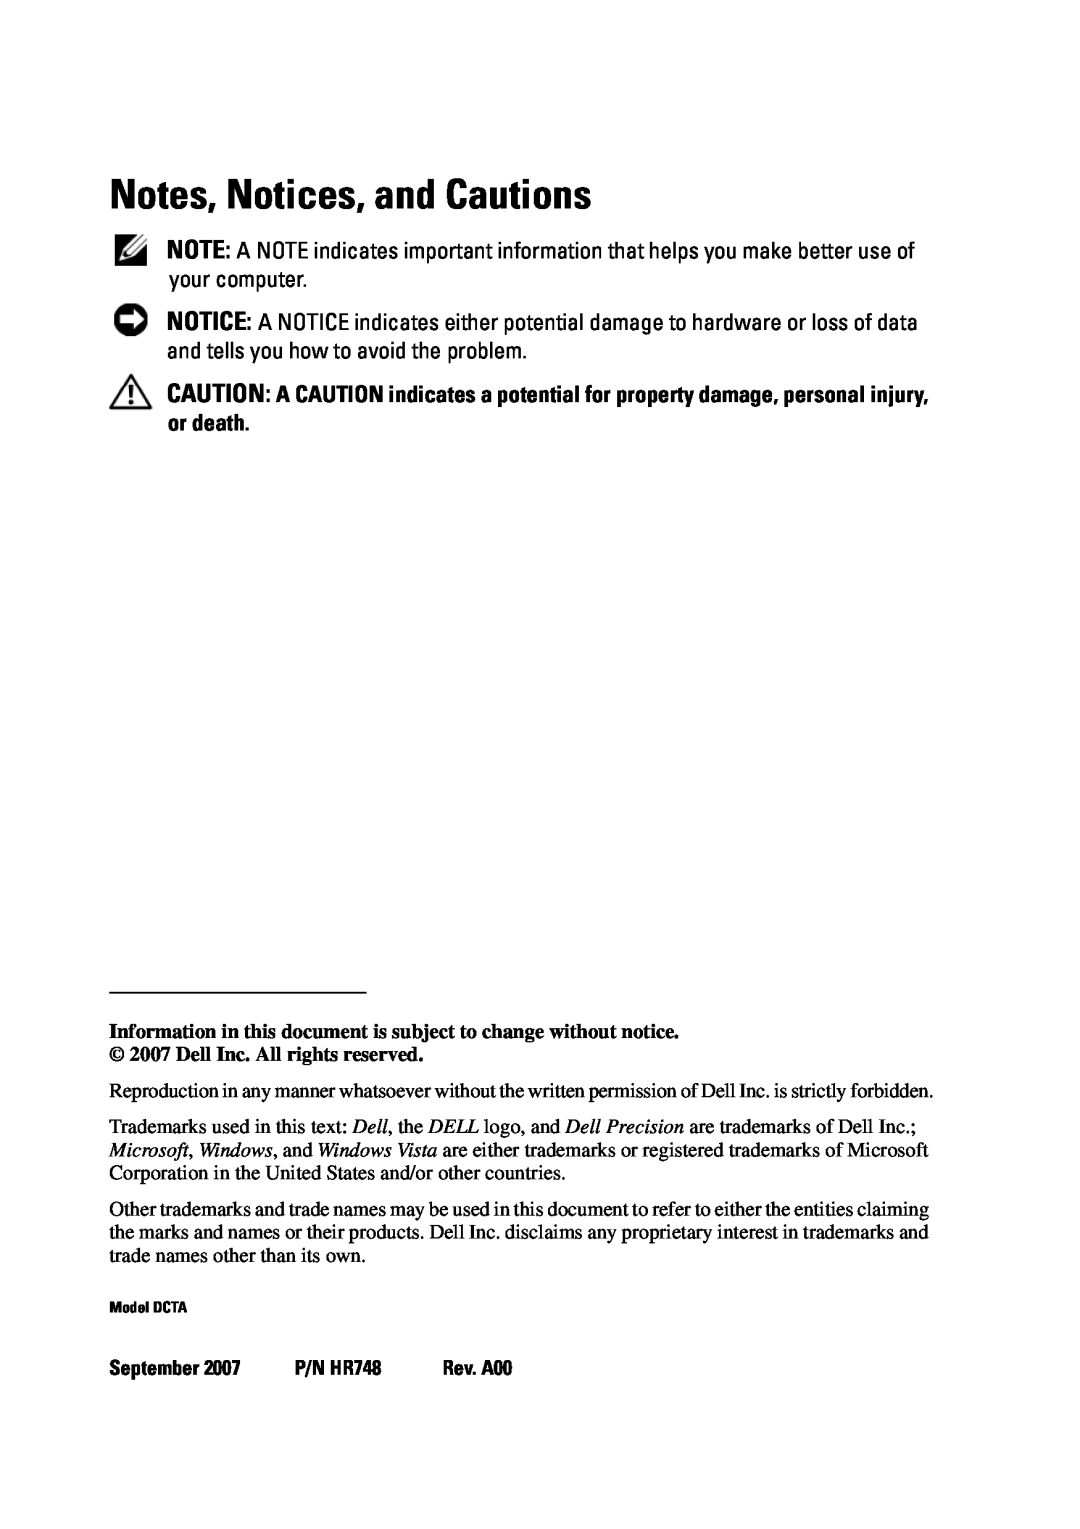 Dell T5400 manual Notes, Notices, and Cautions, September, P/N HR748 